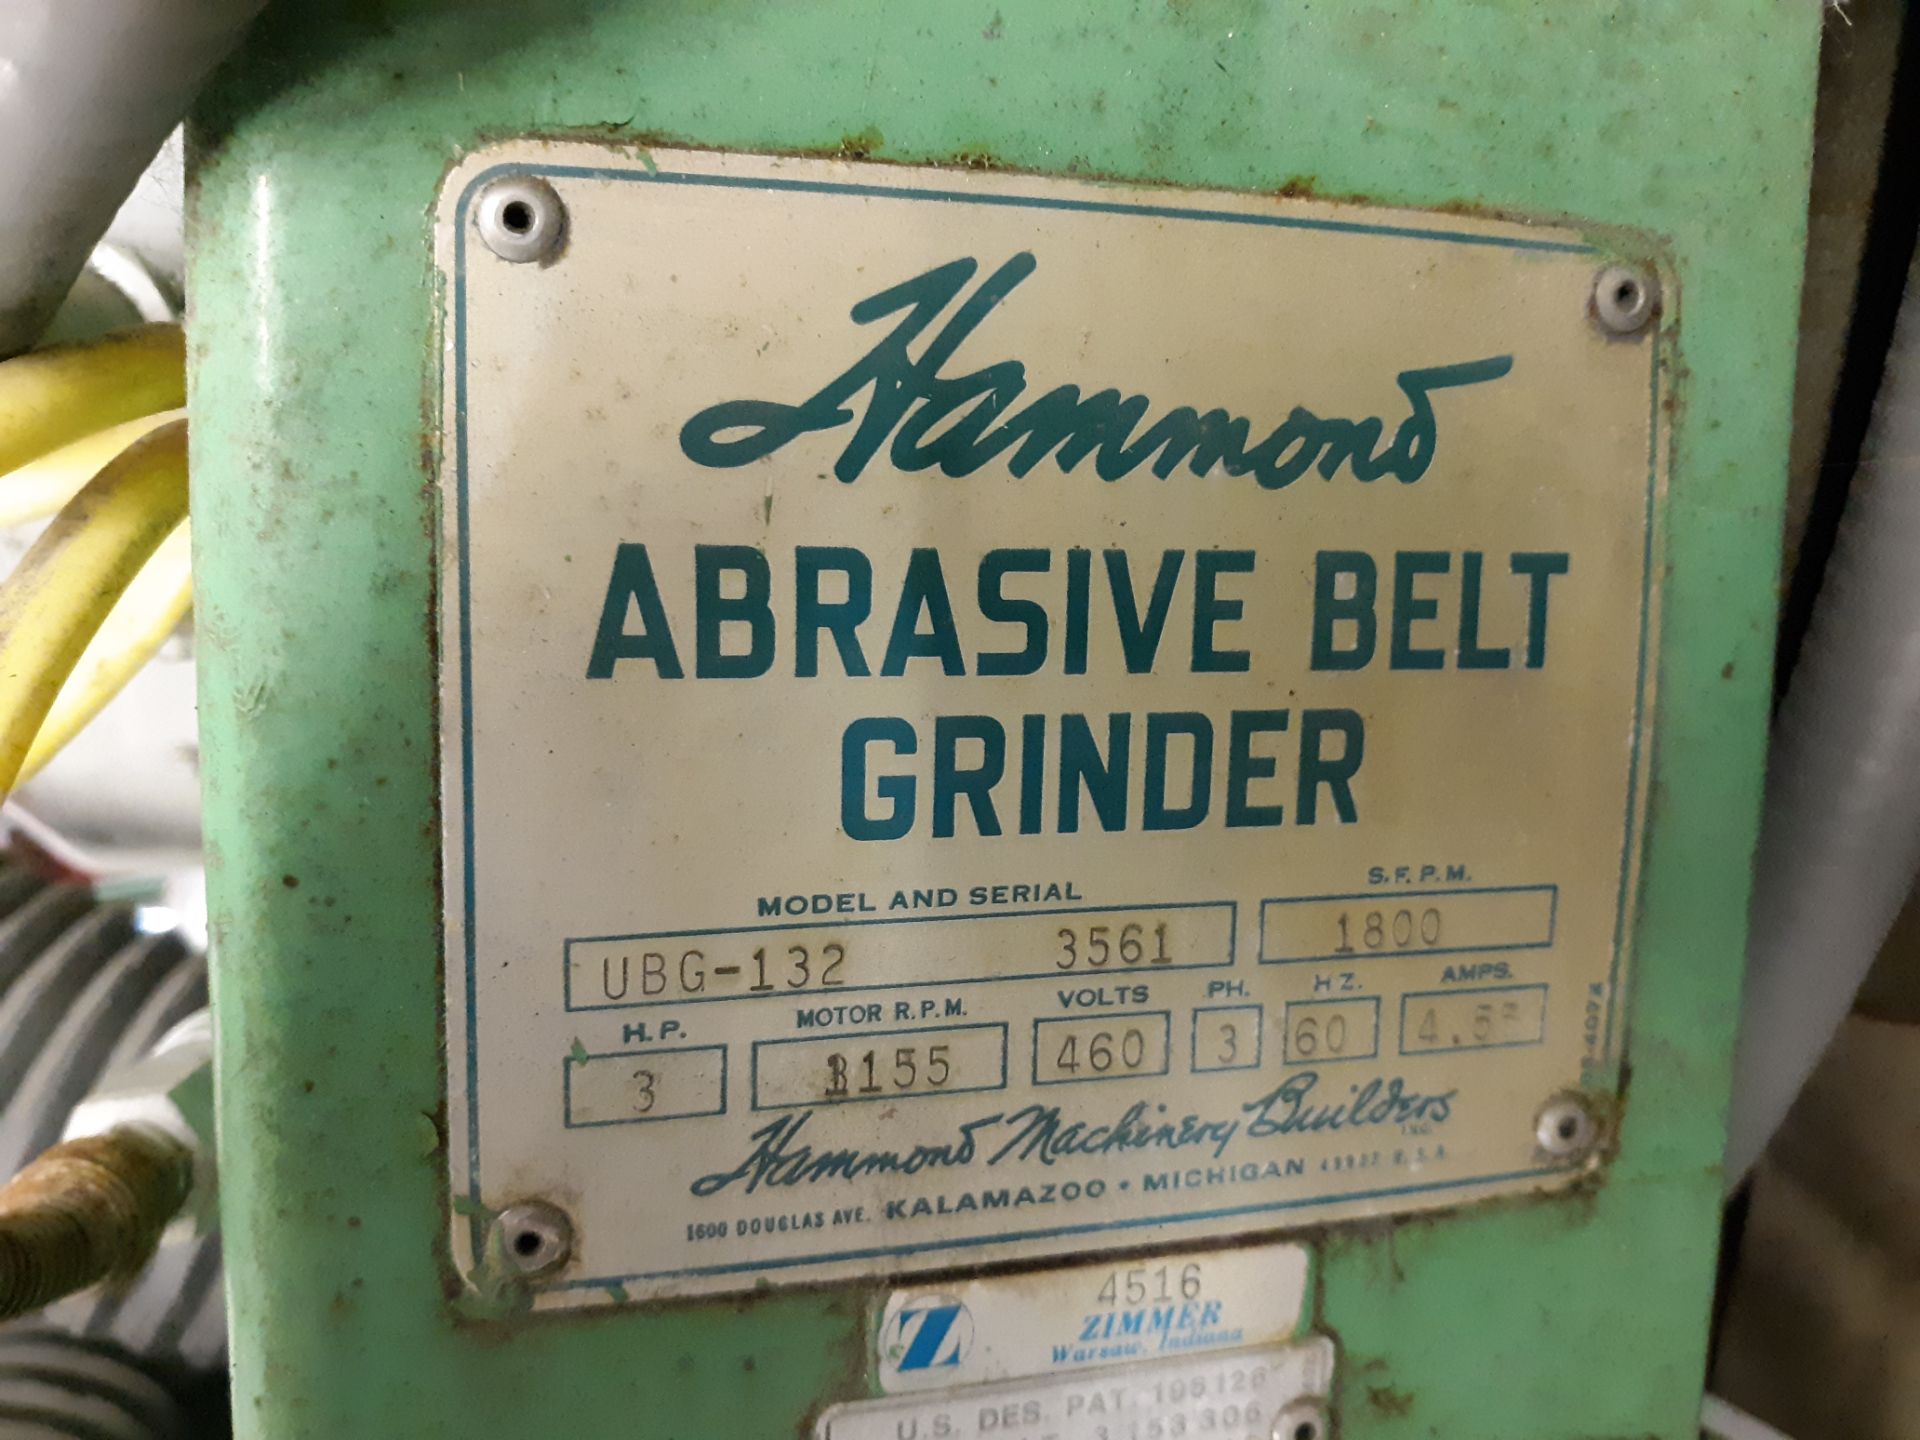 HAMMOND ABRASIVE BELT GRINDER MODEL-UBG-132 S#3561 3PH/3PH (LOCATED AT: 433 COUNCIL DRIVE, FORT - Image 3 of 3